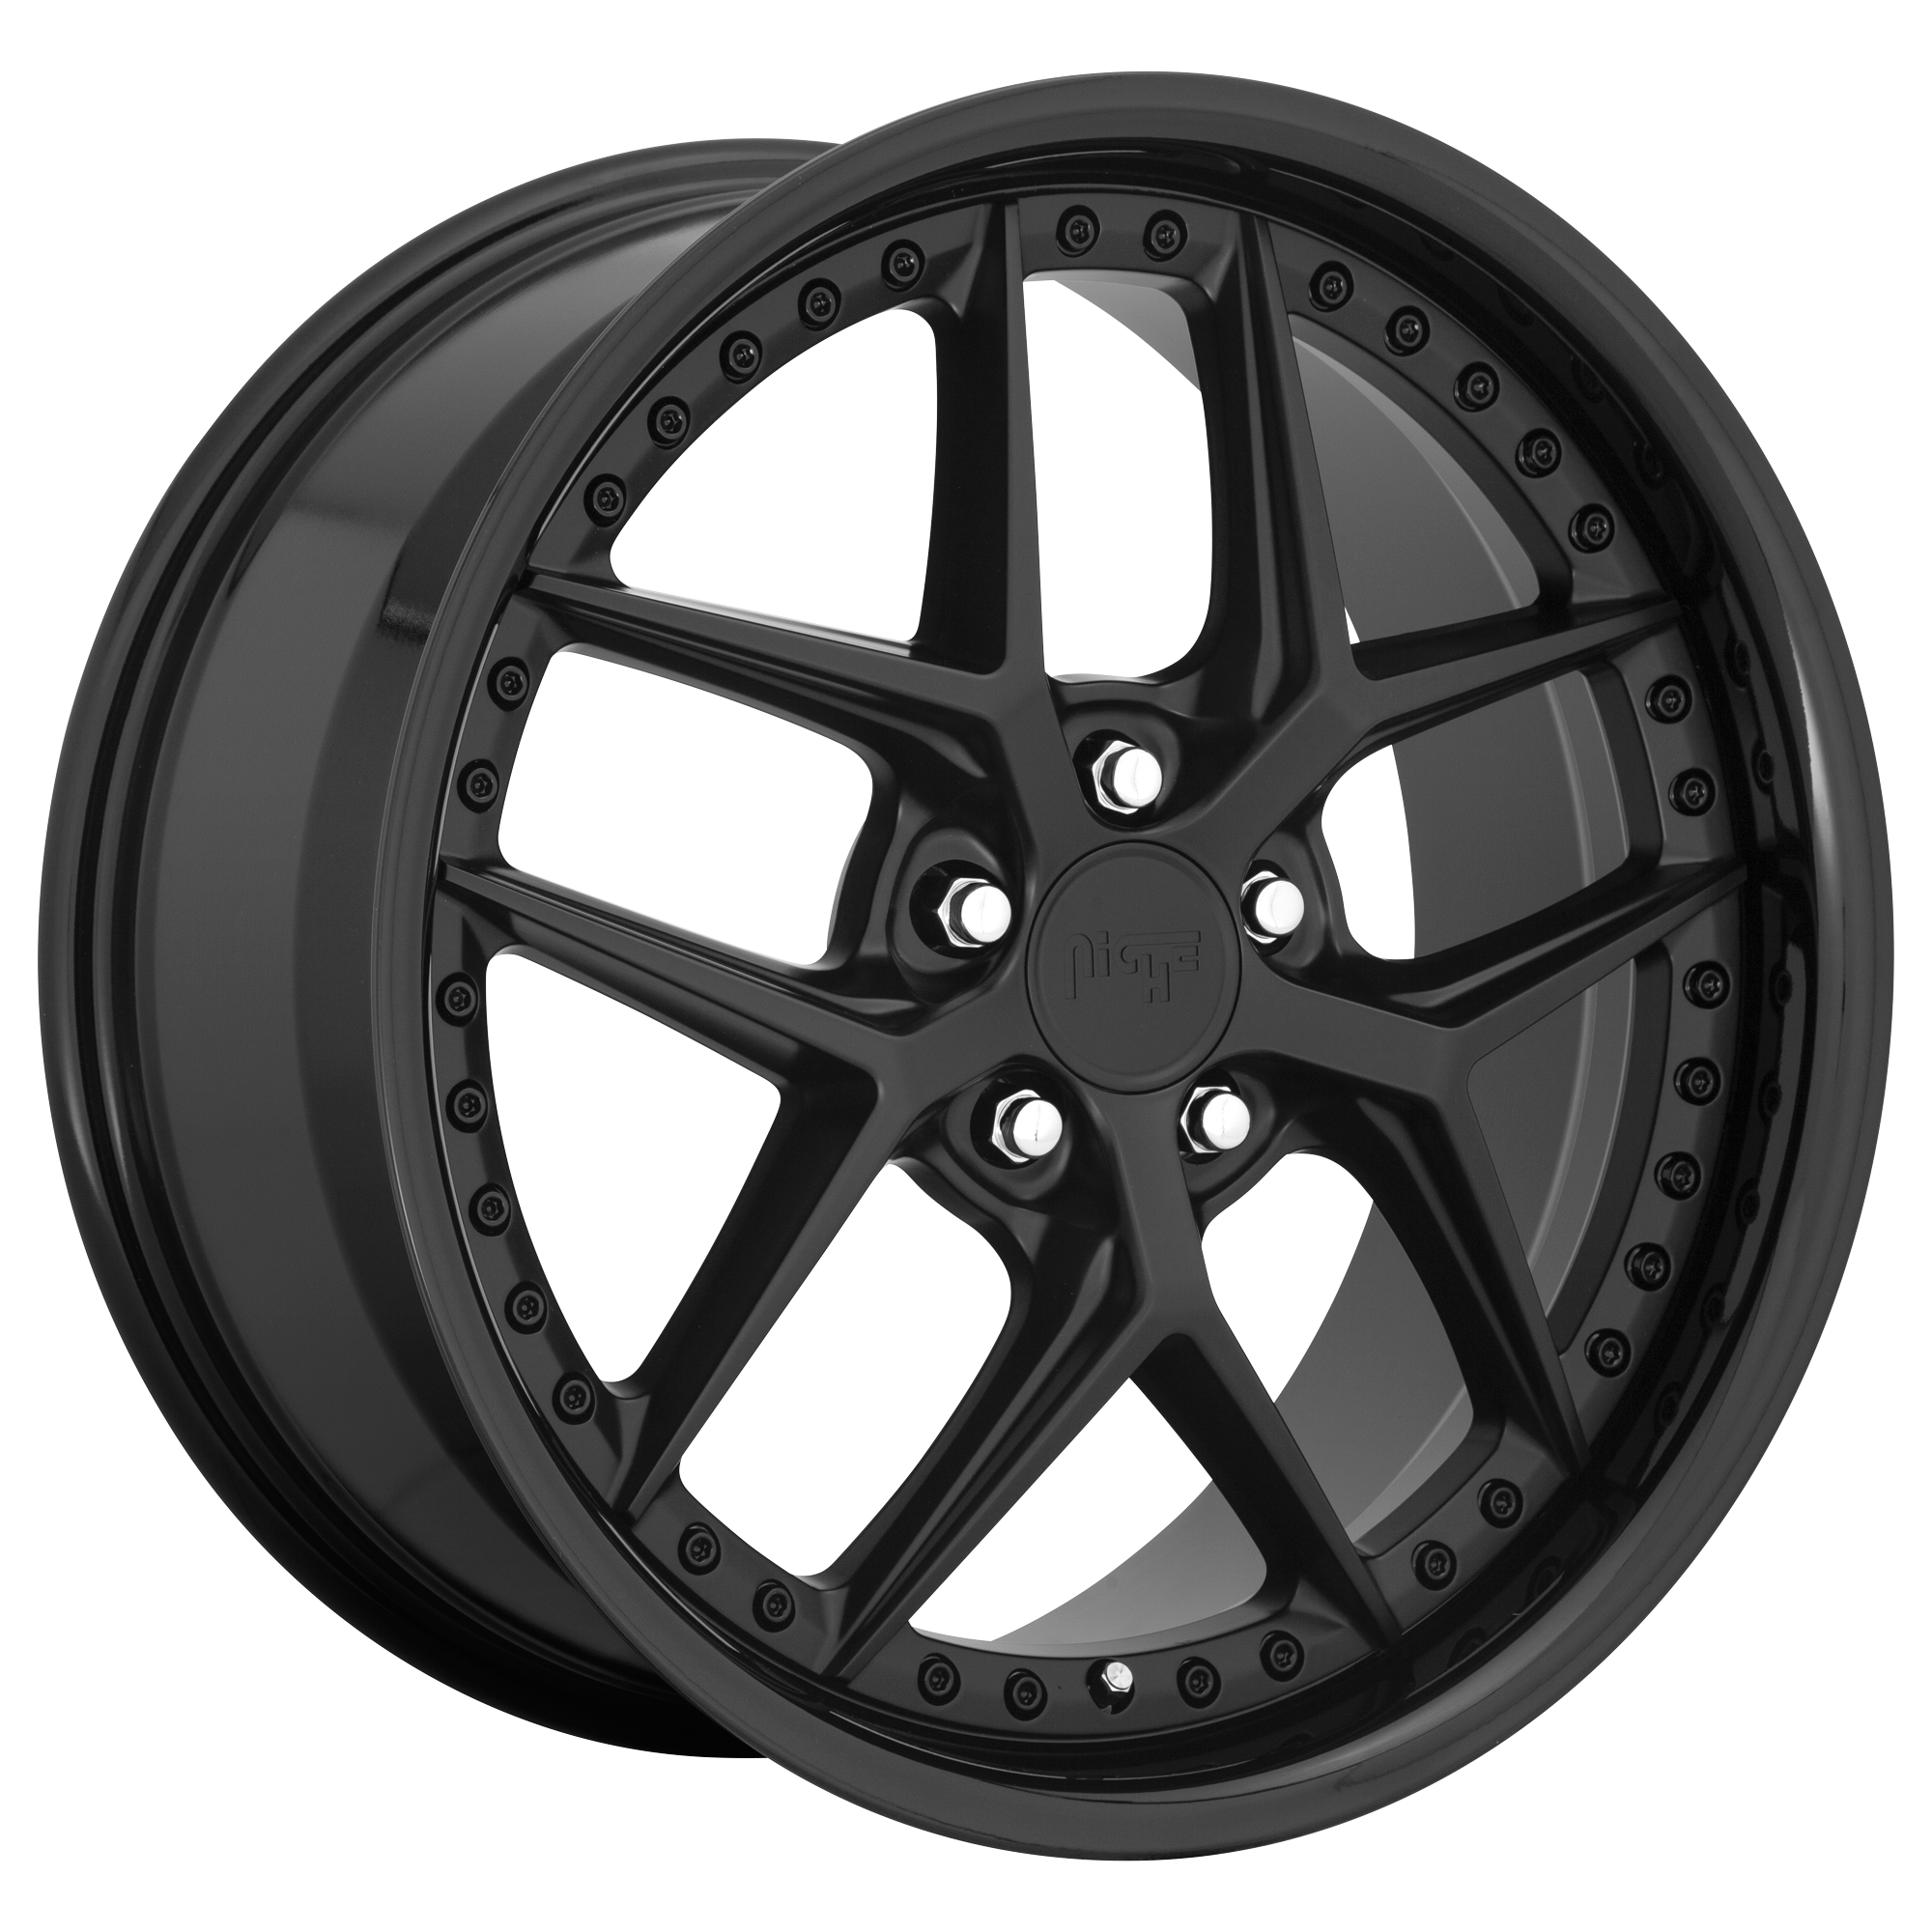 VICE 20x9 5x120.00 GLOSS BLACK MATTE BLACK (35 mm) - Tires and Engine Performance